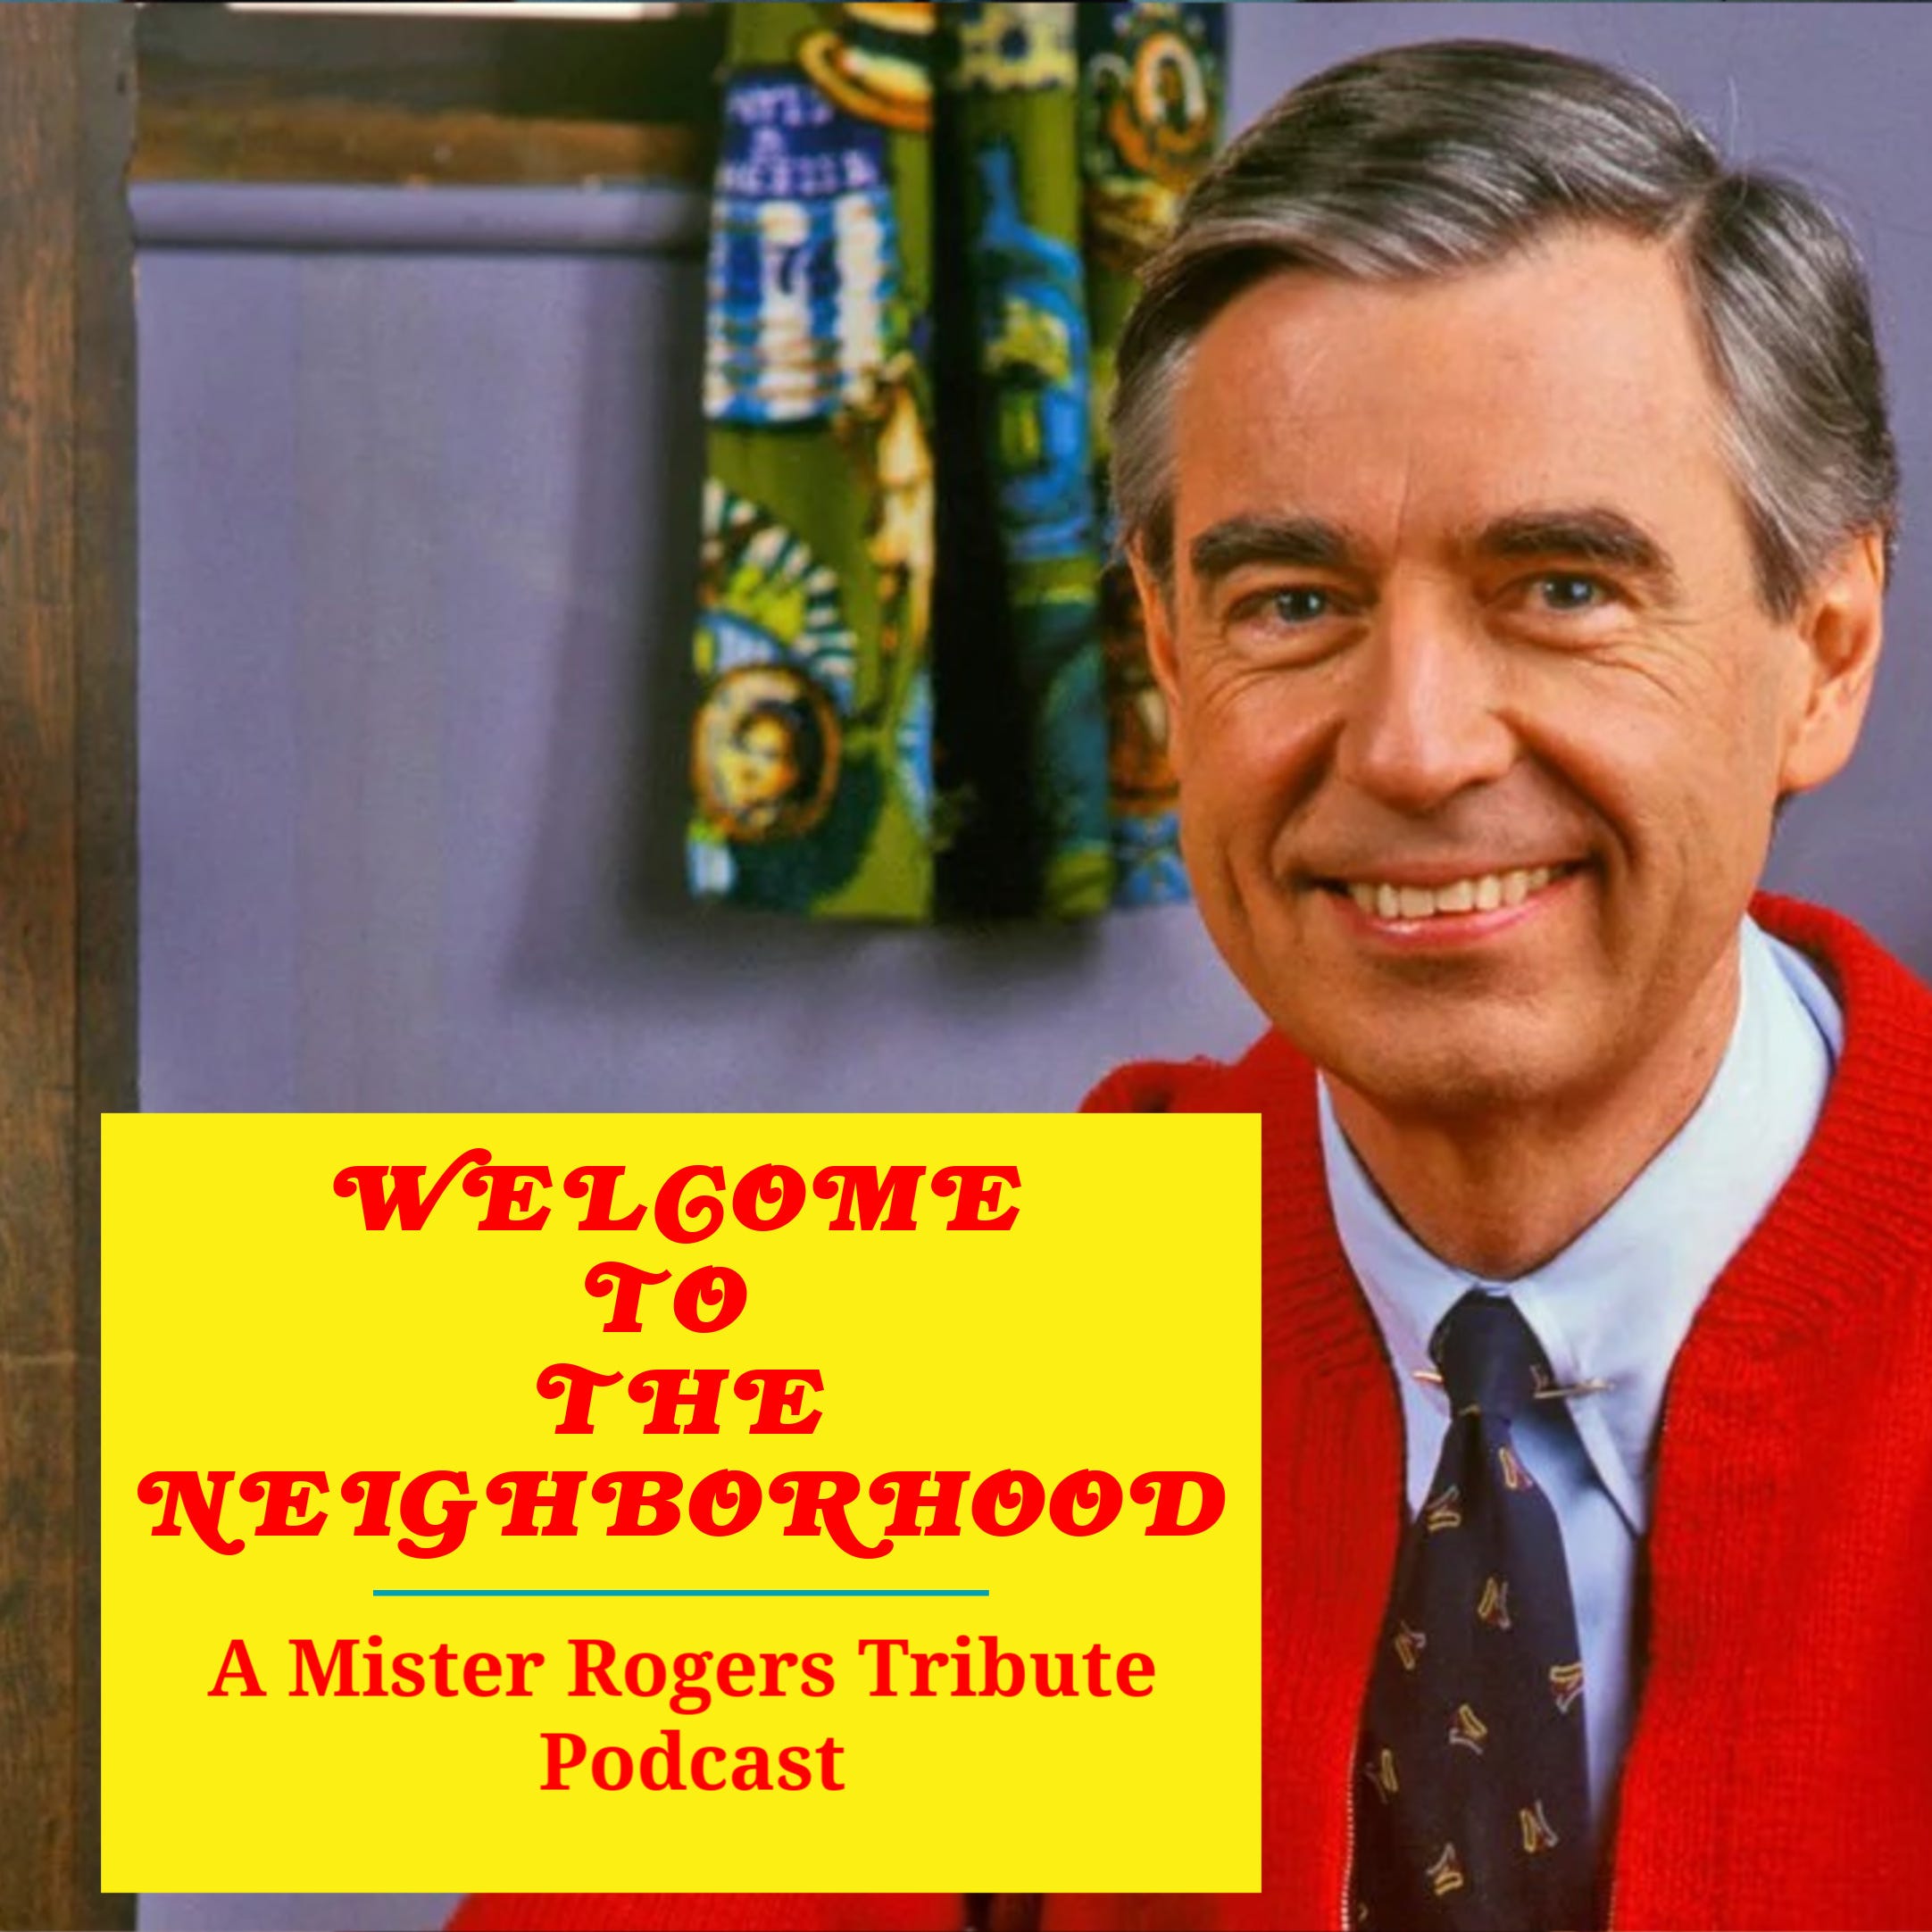 Guests Dave and JJ Heller - Welcome To The Neighborhood: A Mister Rogers Tribute Podcast